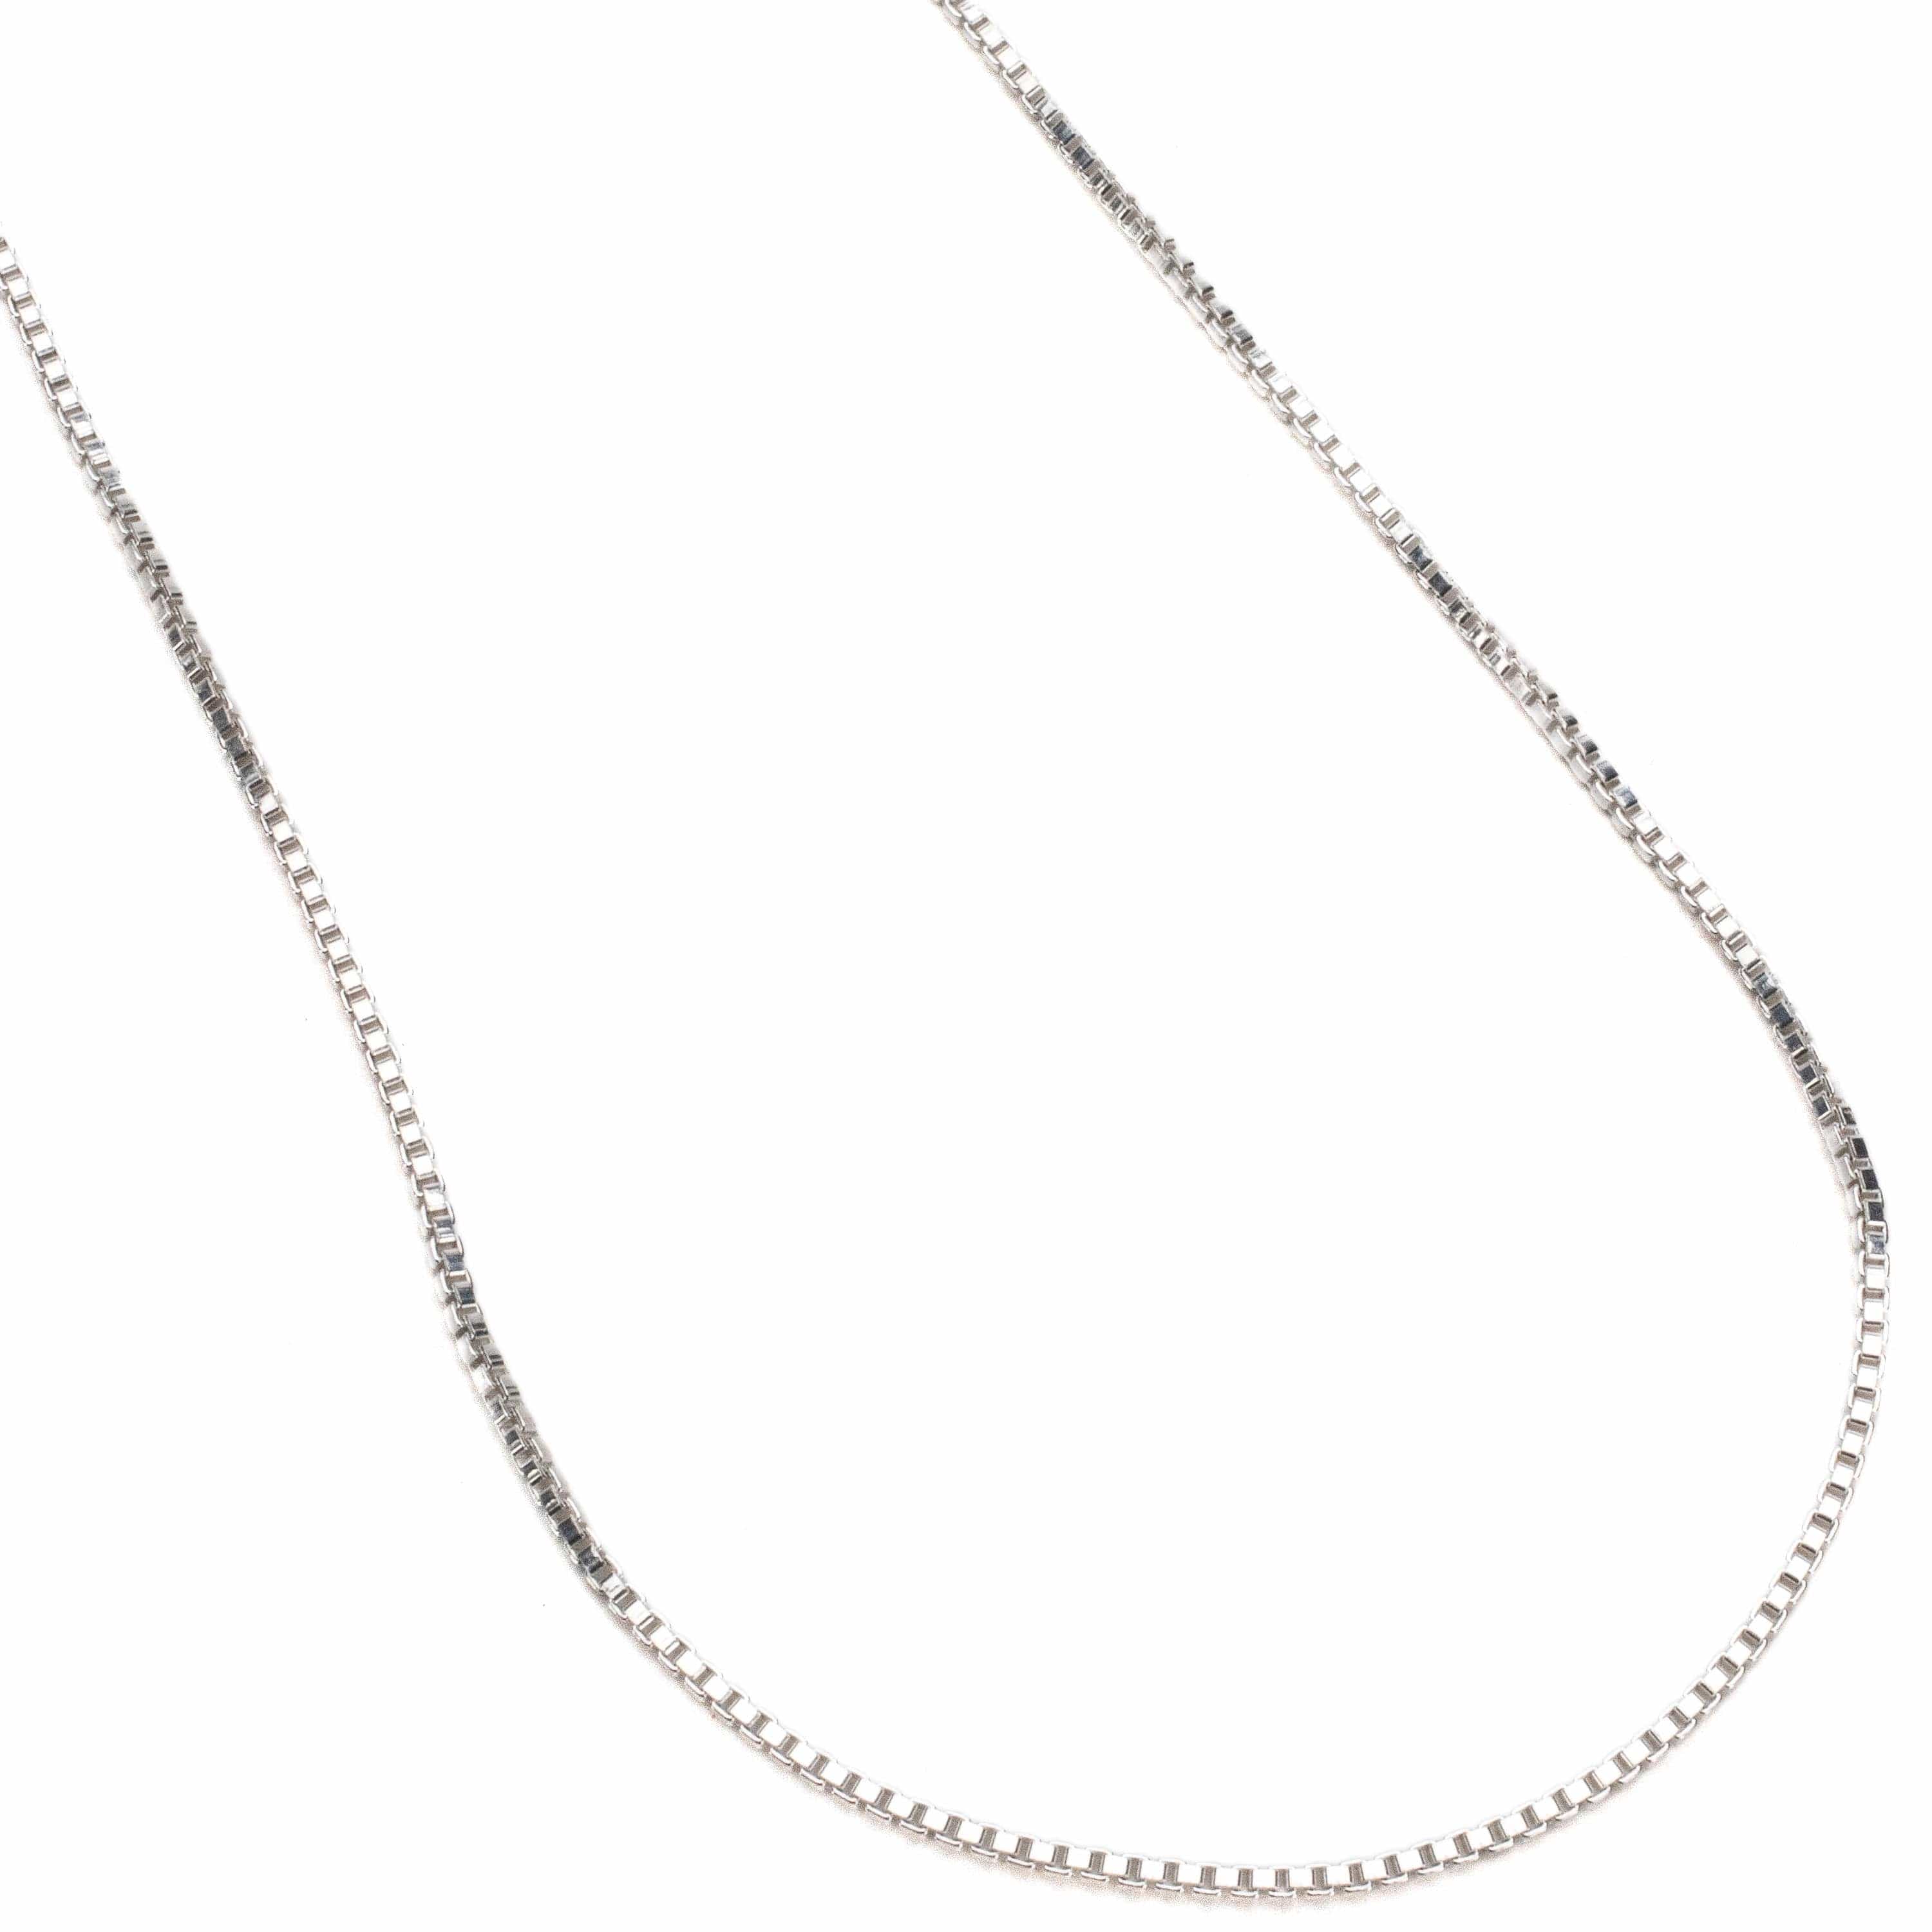 Kalifano Sterling Silver Chains 22" Italian Sterling Silver Box Chain Necklace 1.4mm SC-BXC26-22